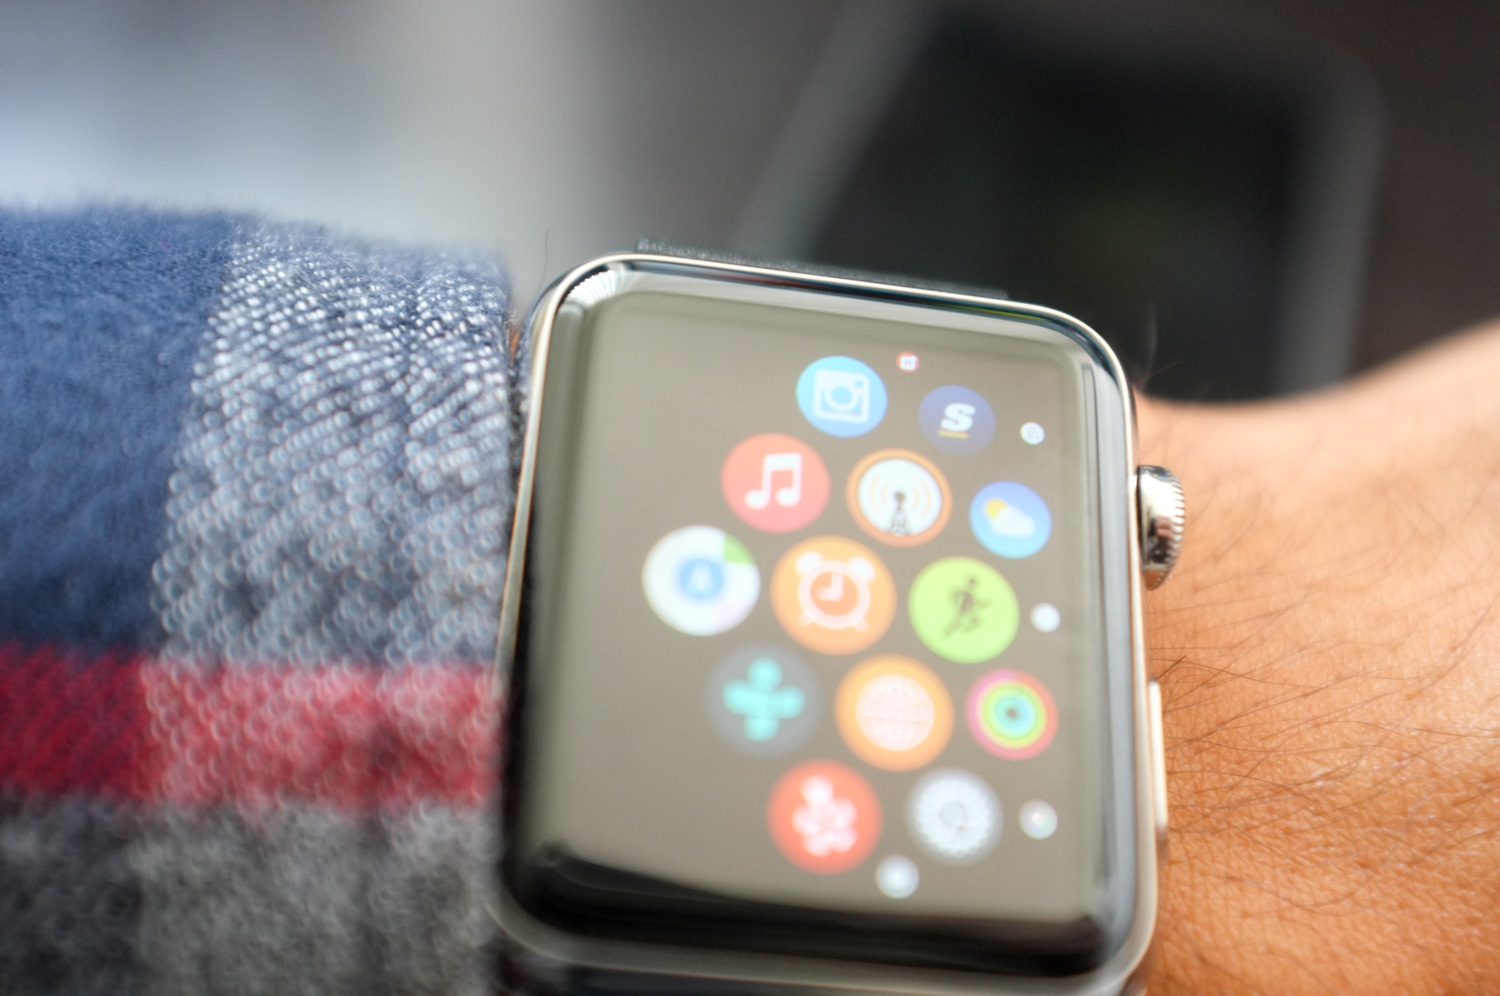 "Apple Watch Demand is Looking Worse Than Expected ...